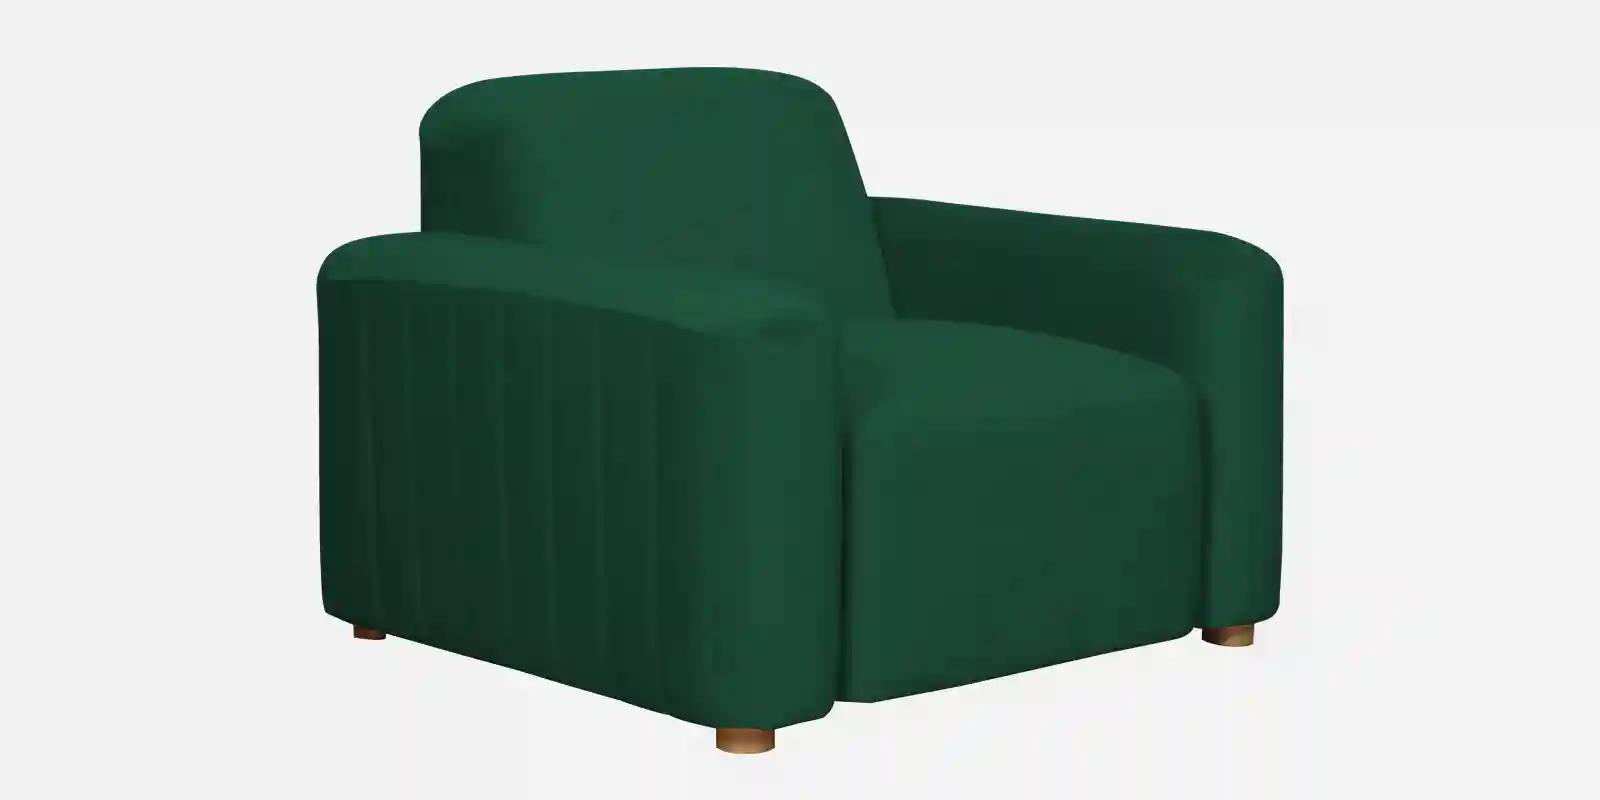 Pine Wood Polyester Fabric Teal Green -1-Seater Sofa